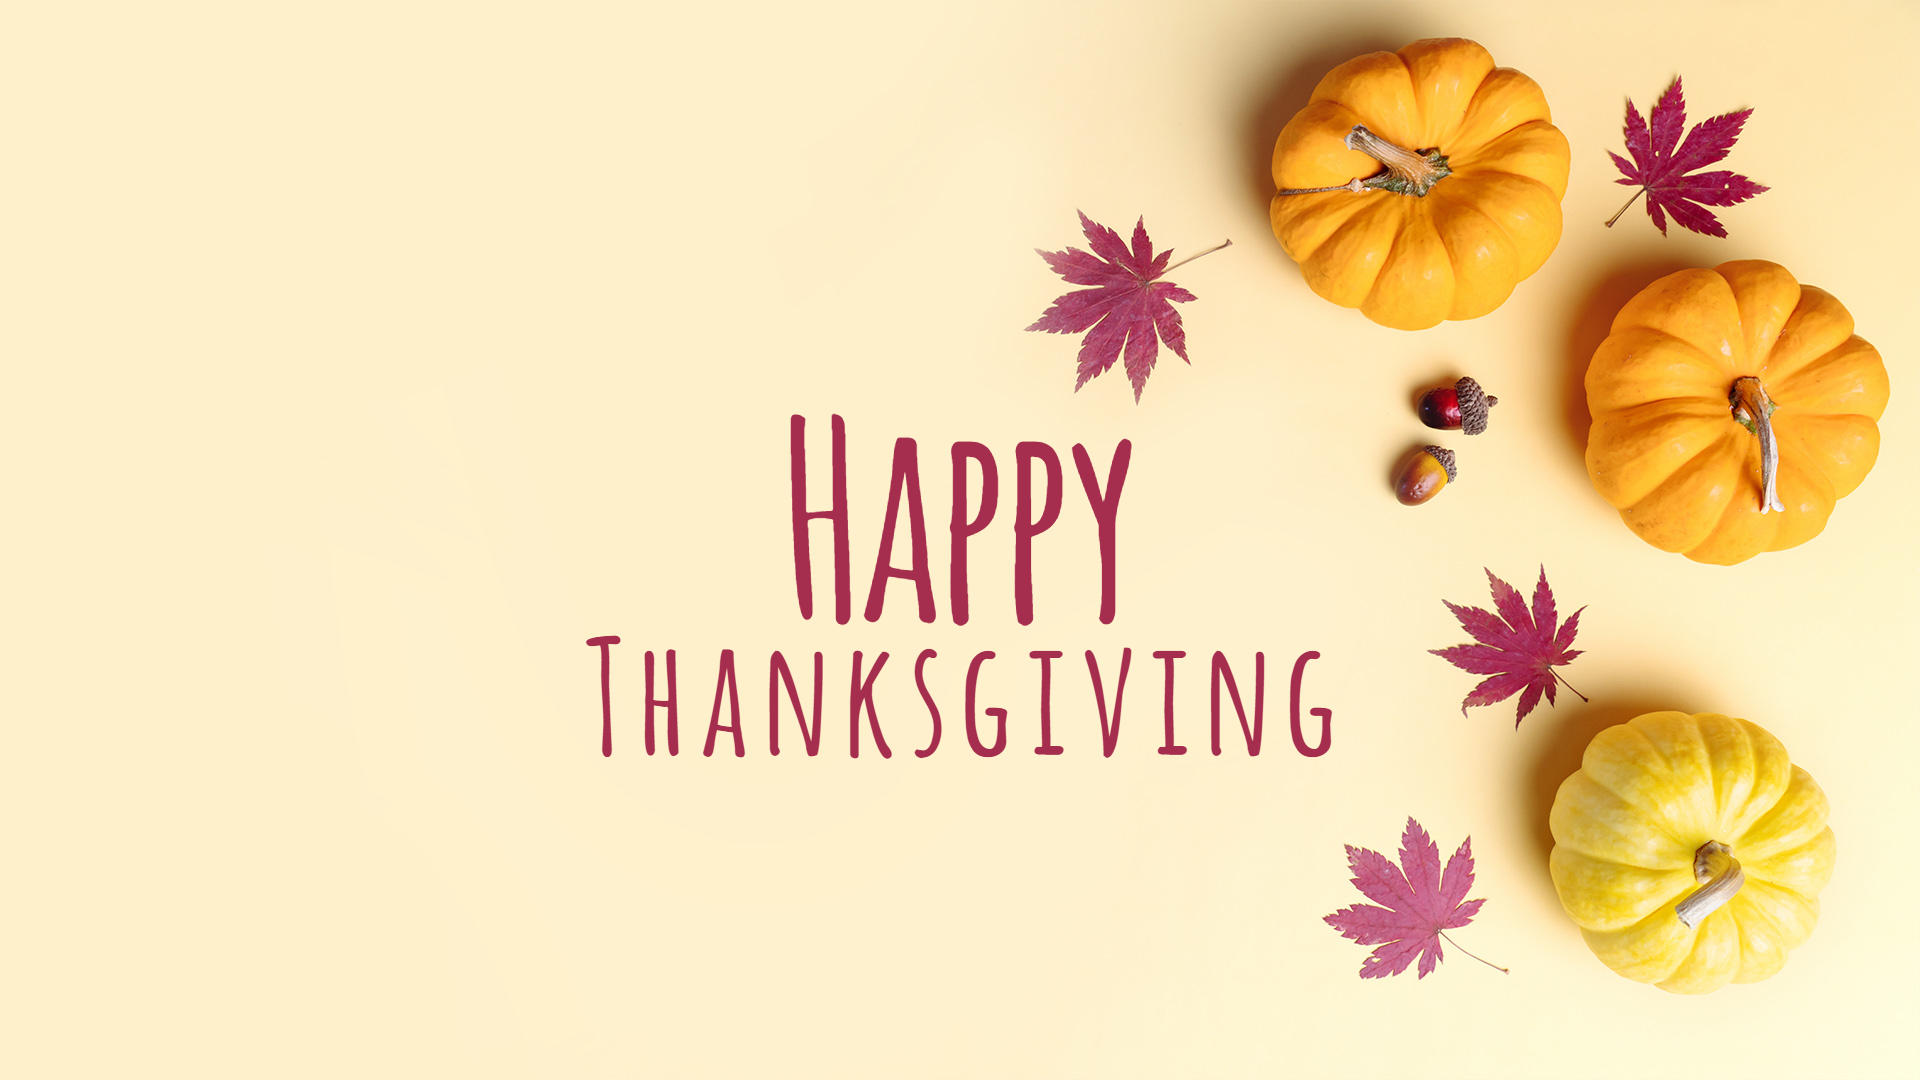 20+ Thanksgiving Wallpapers & Backgrounds for Your Holiday Celebration 2022